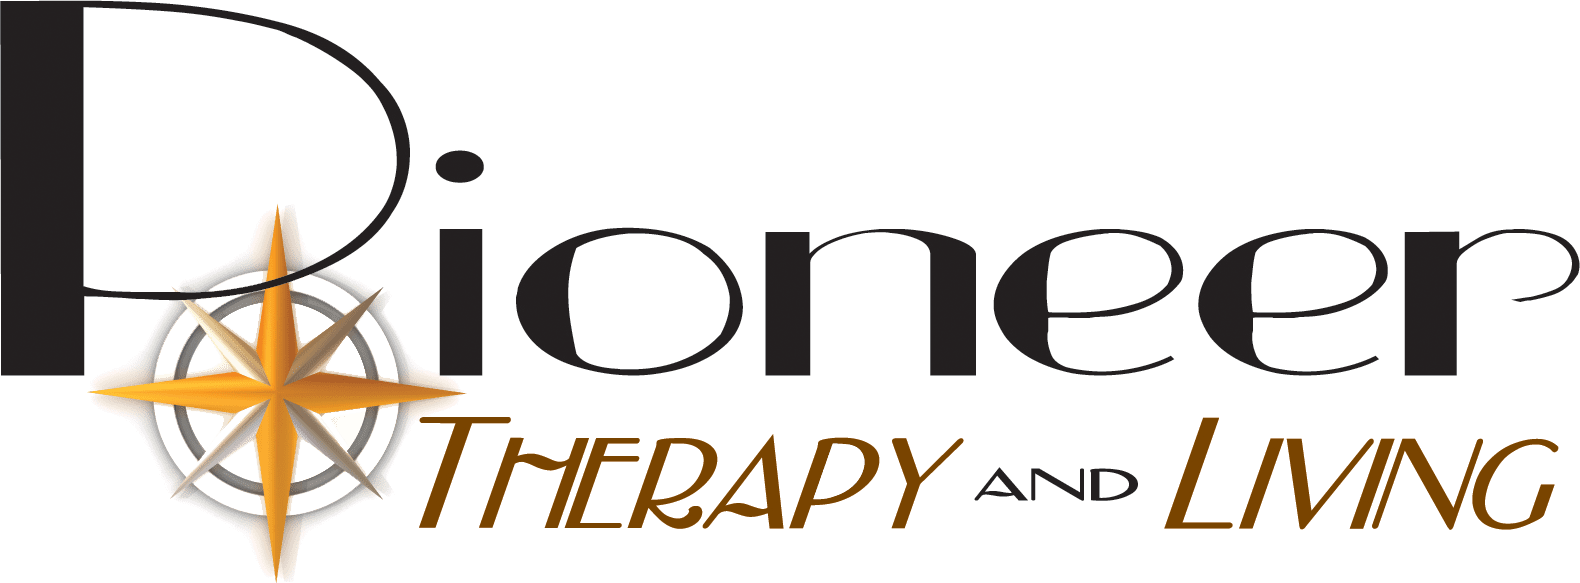 Pioneer Therapy and Living